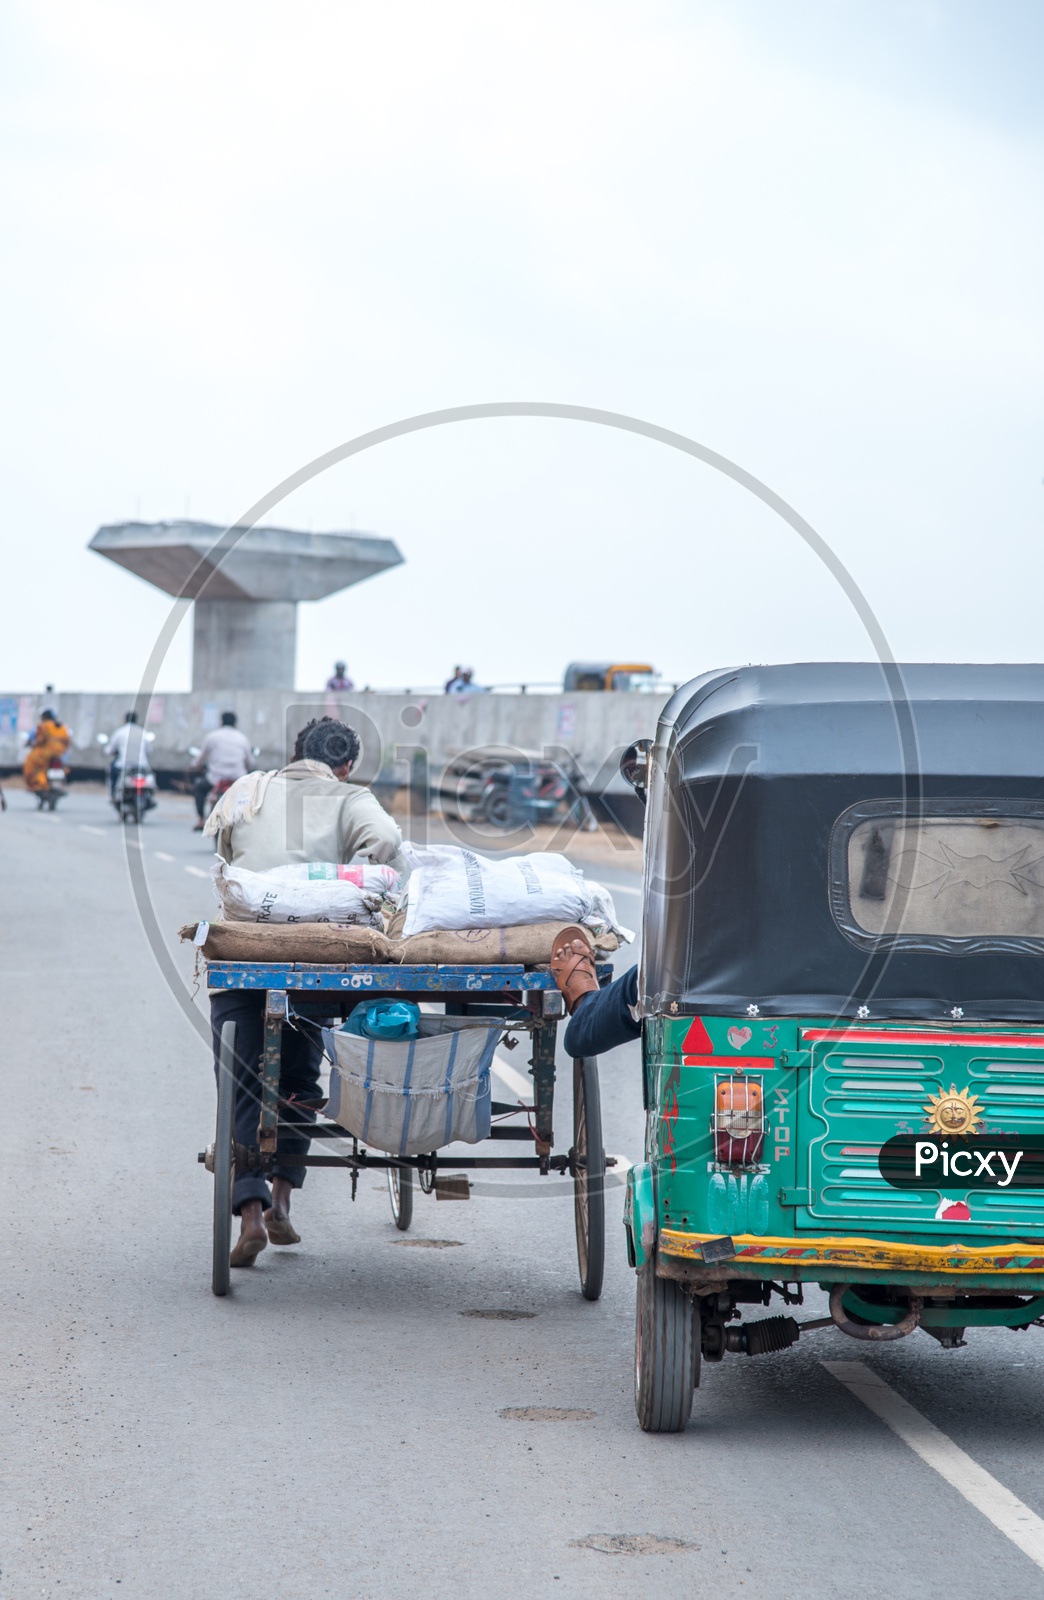 An Auto Driver helping out a Rickshaw Puller on a High Ground.